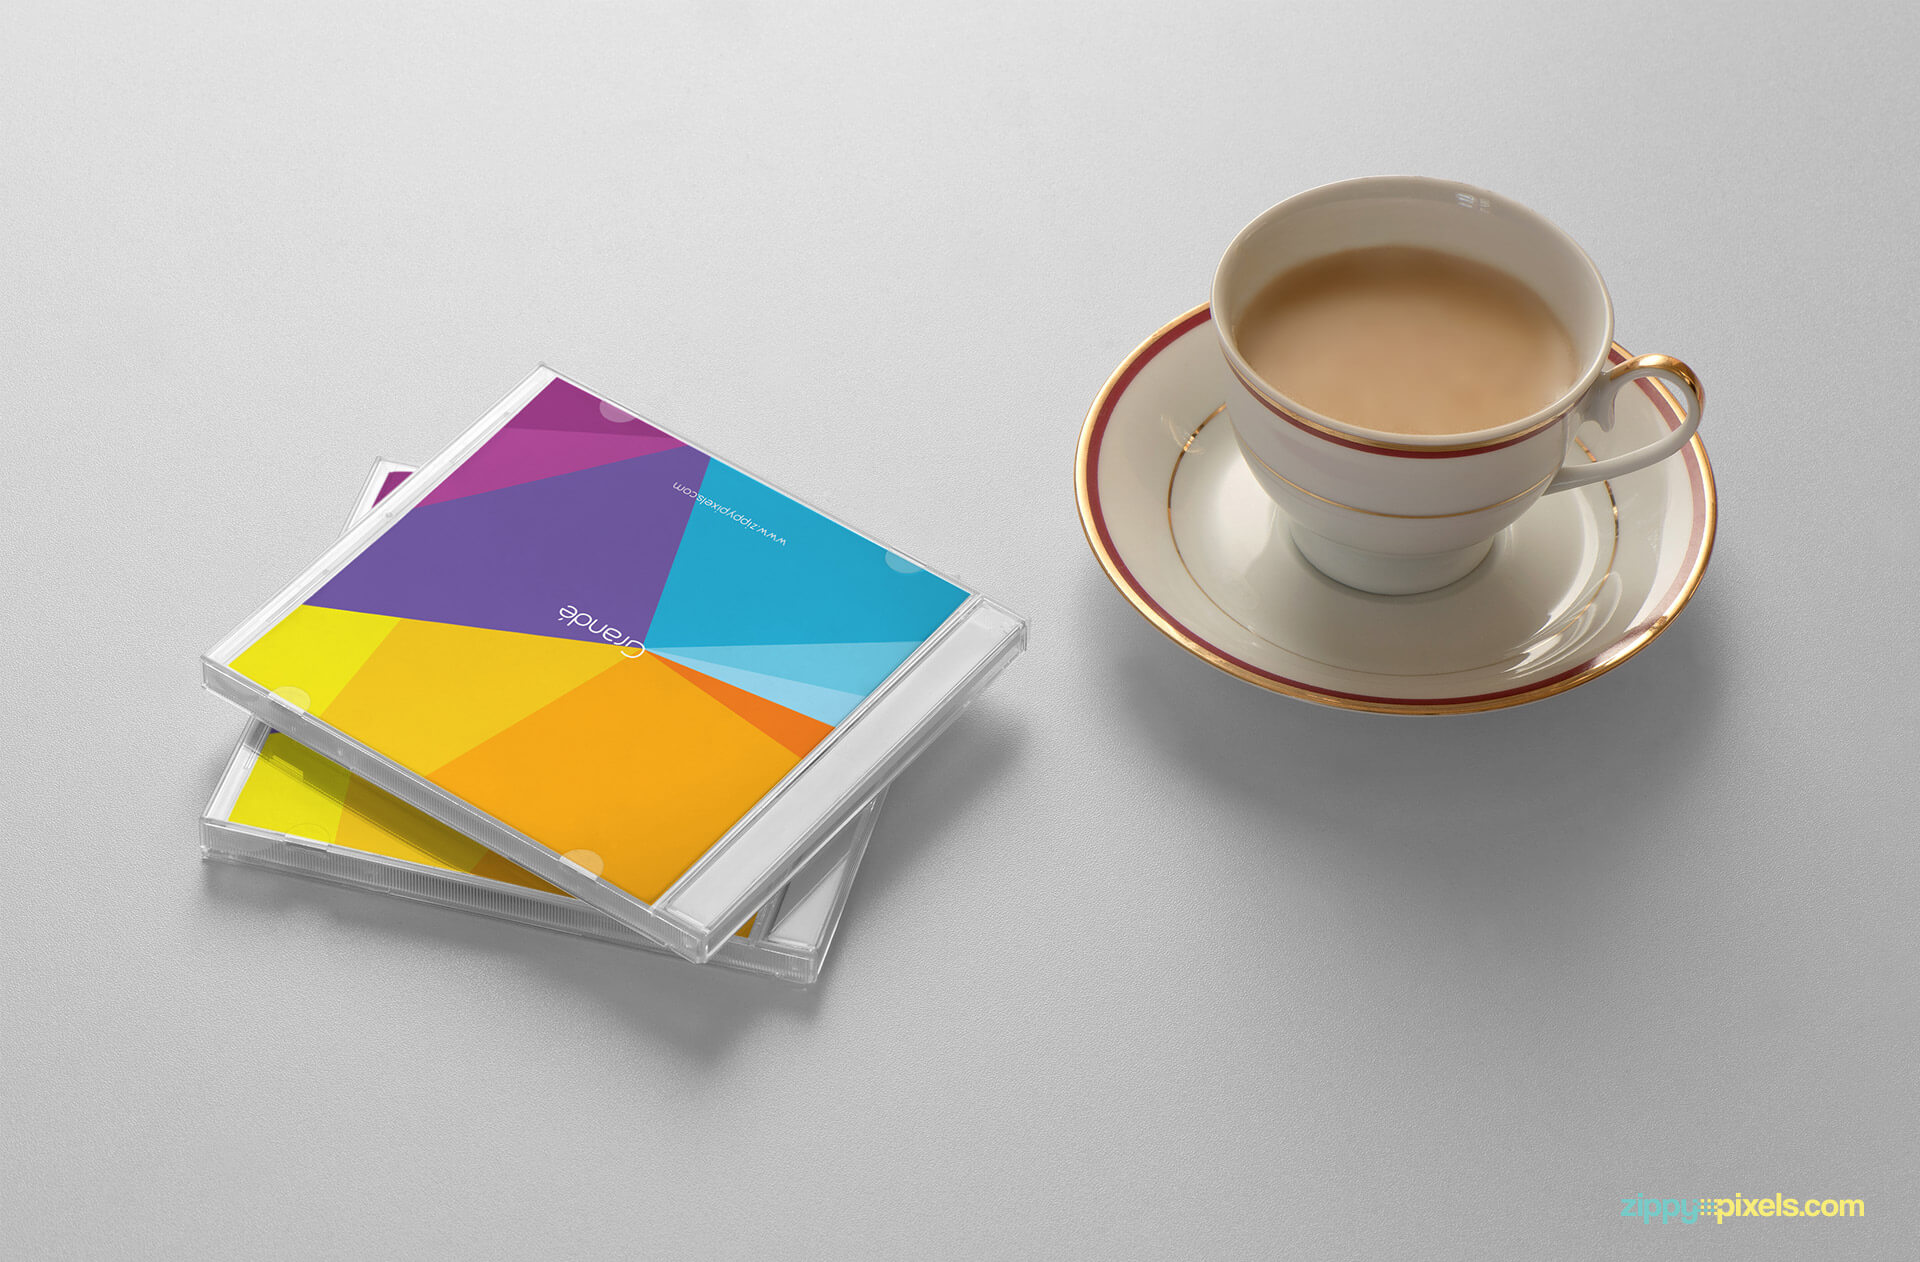 Branding Mockup of CD Covers with Tea Cup